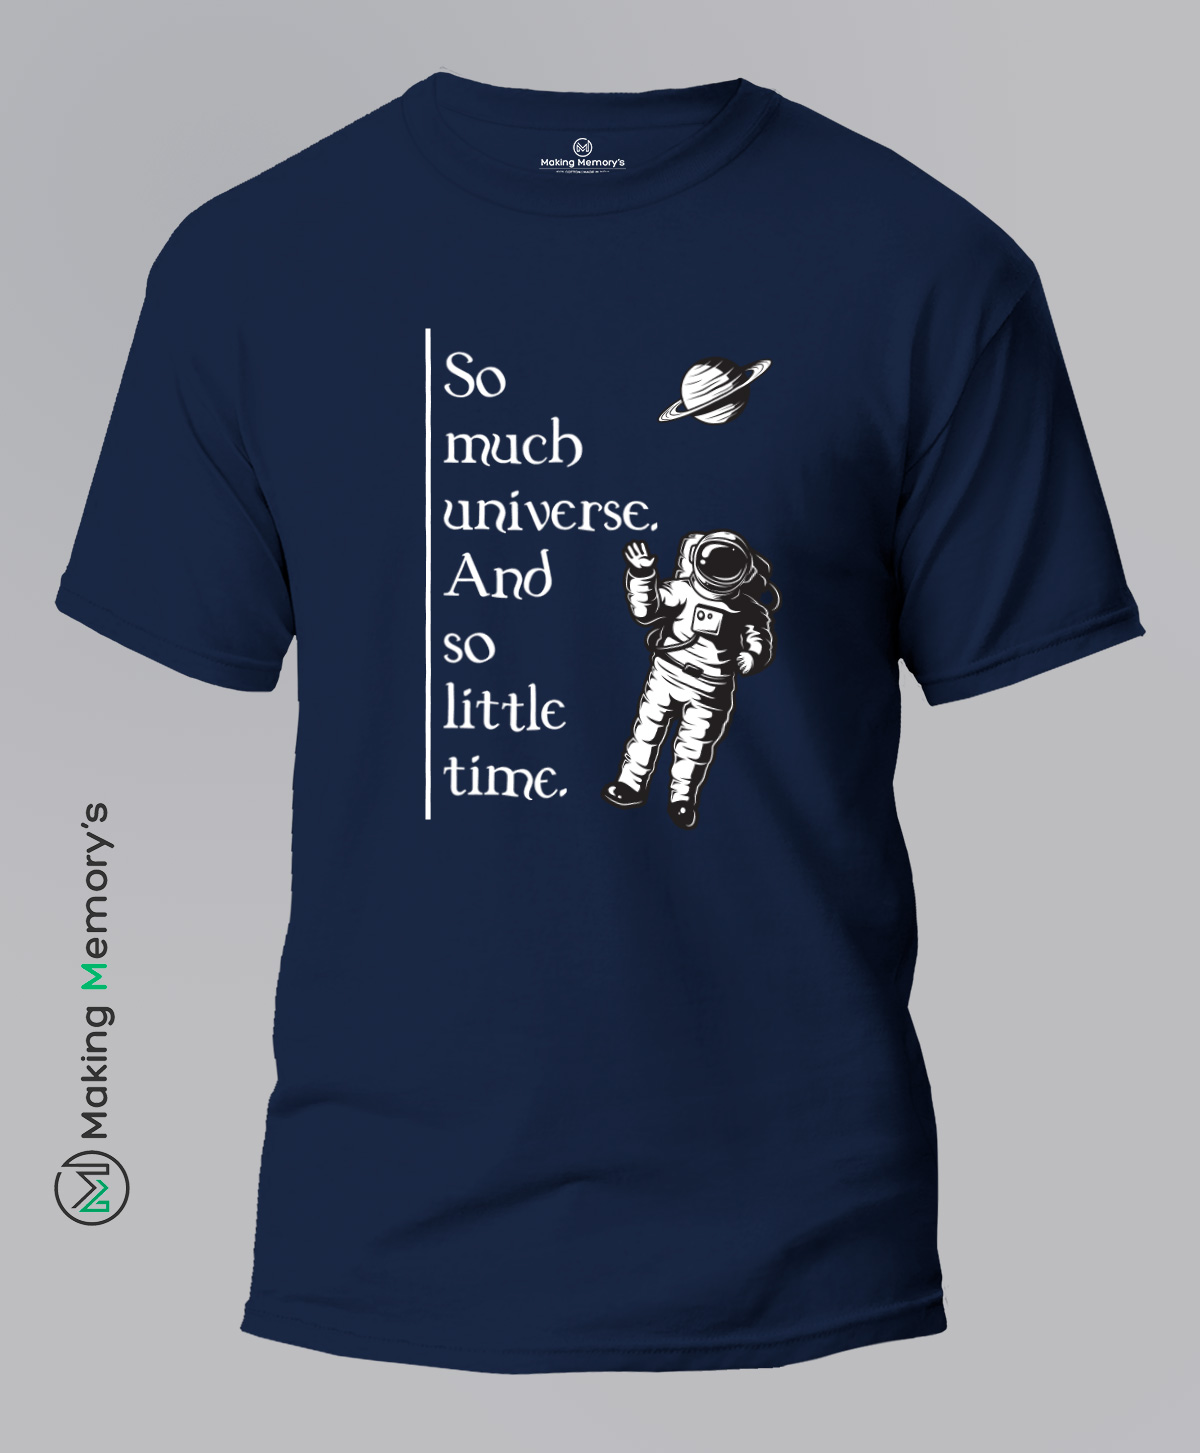 So-much-universe-and-so-little-time-blue-t-shirt